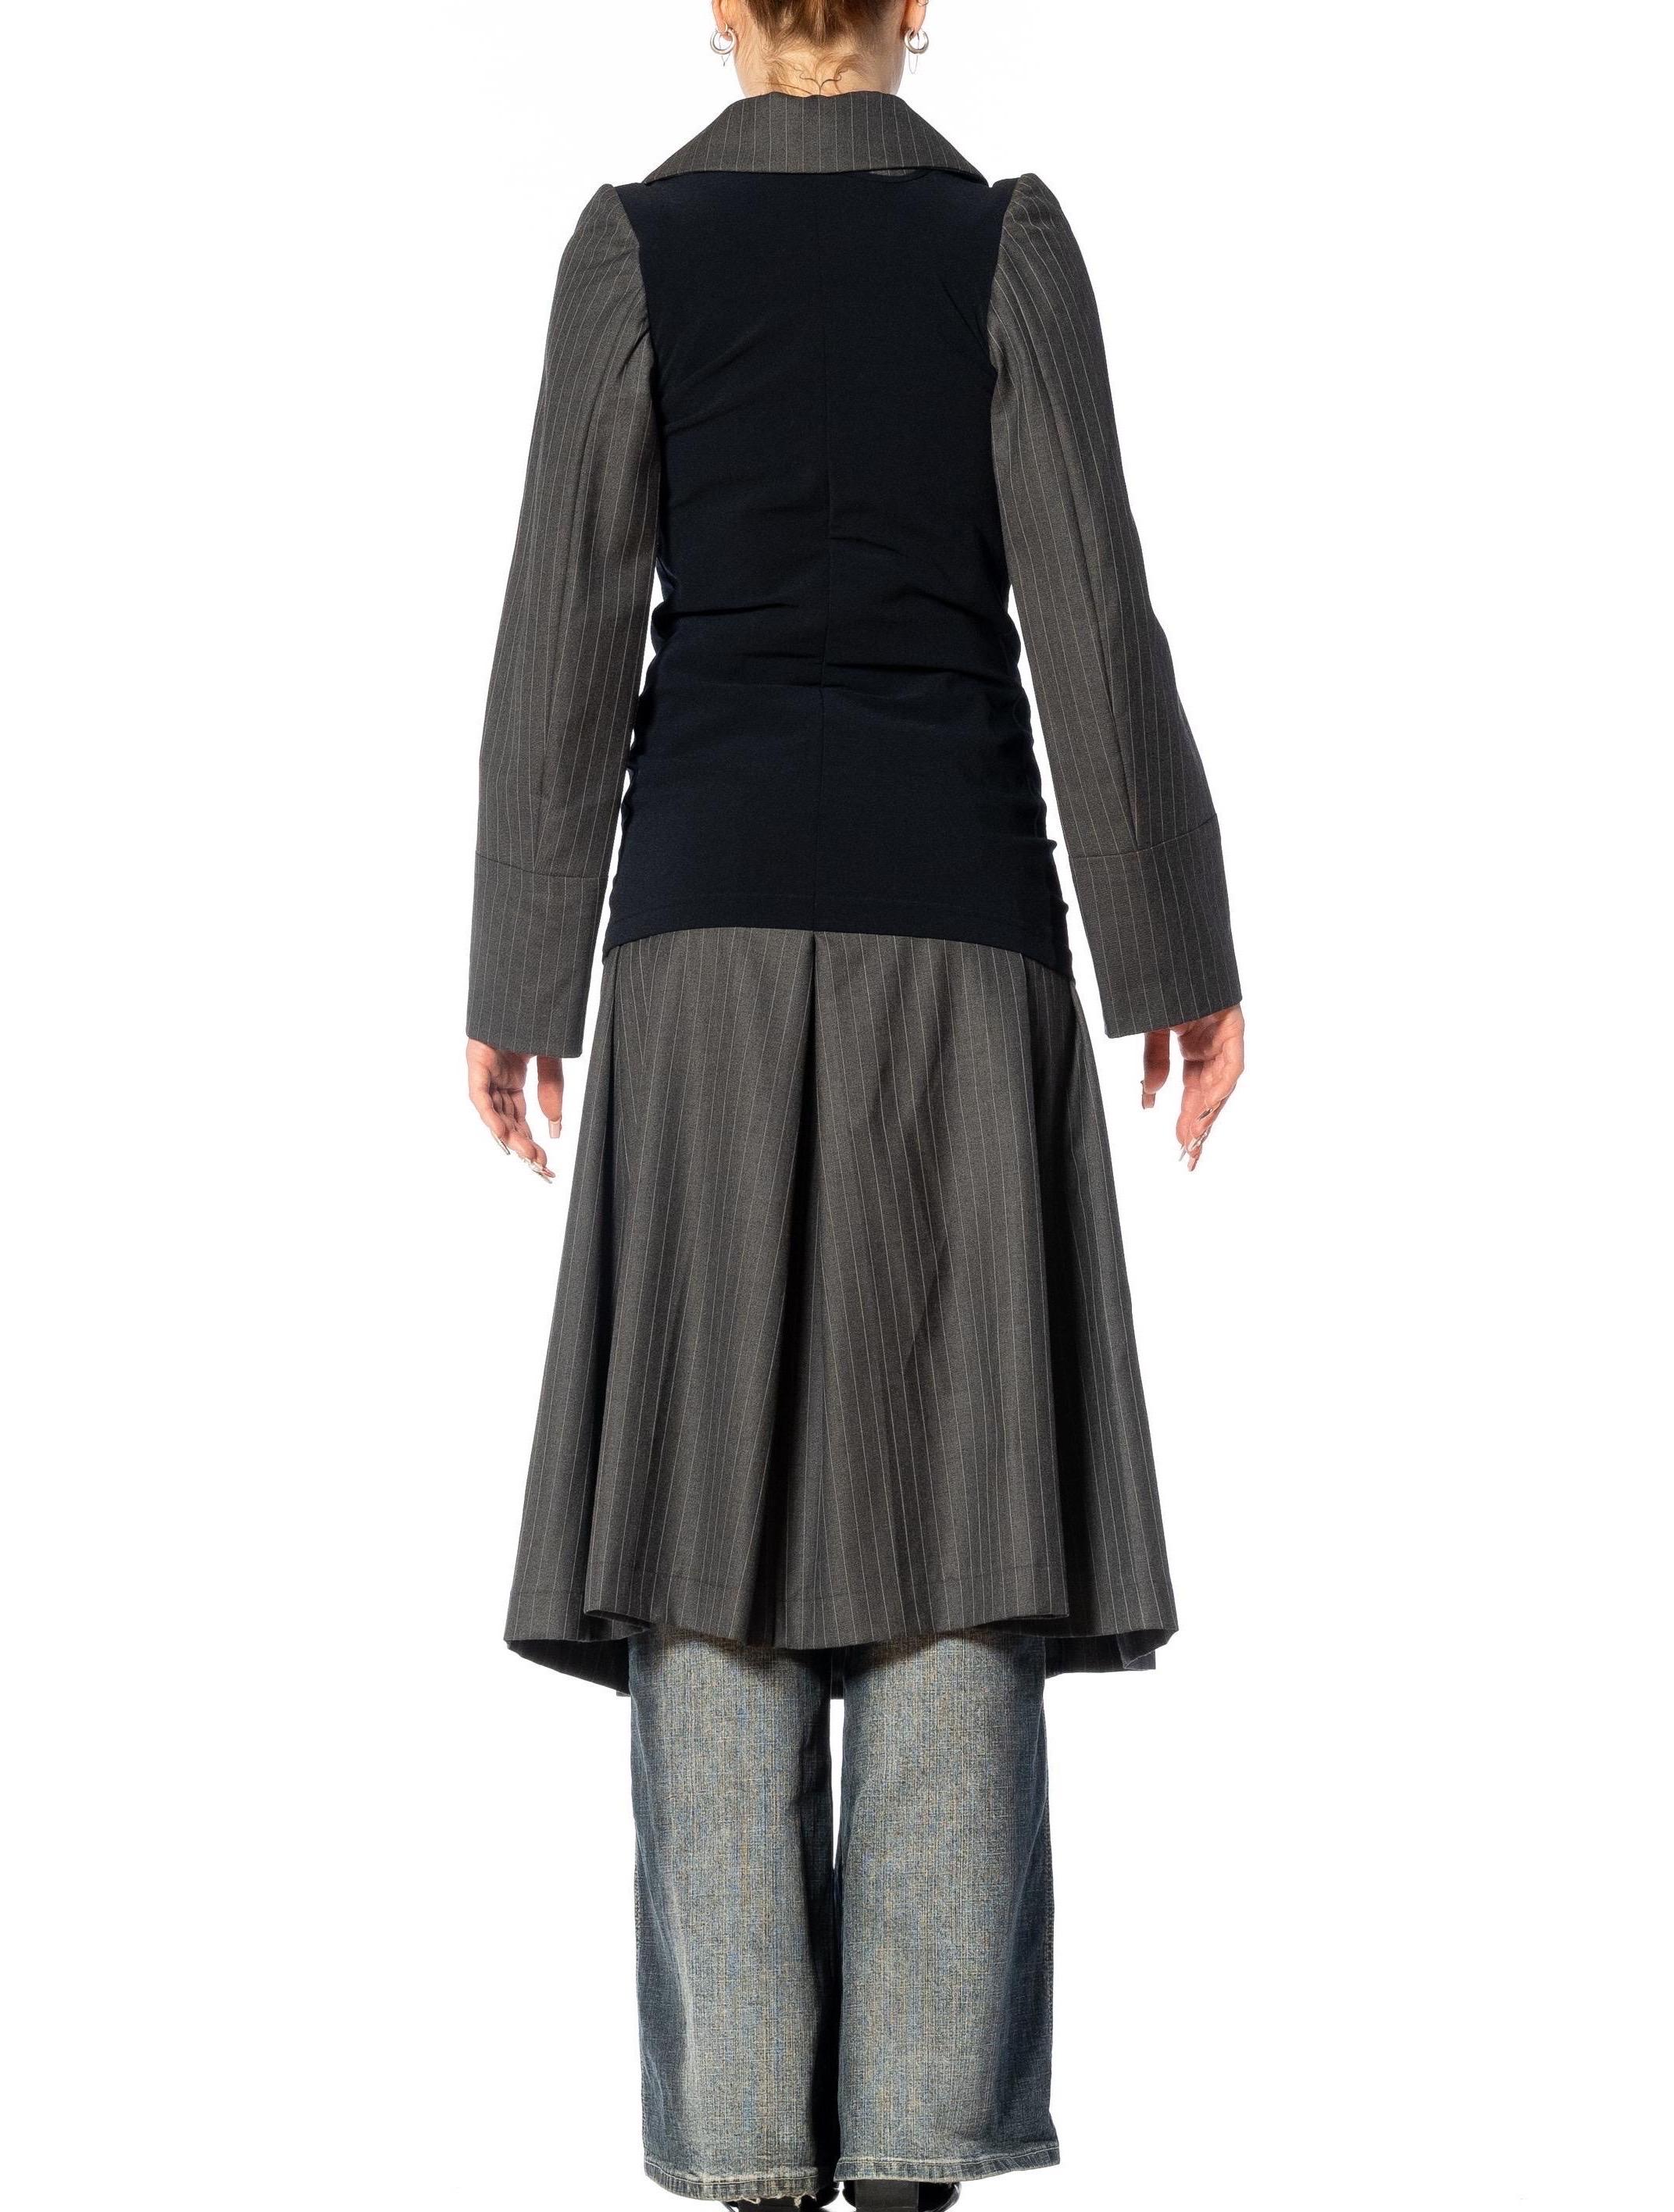 2000S COMME DES GARCONS Gray & Navy Wool Coat With Shrunken Poly Over-Layer 2007 For Sale 6